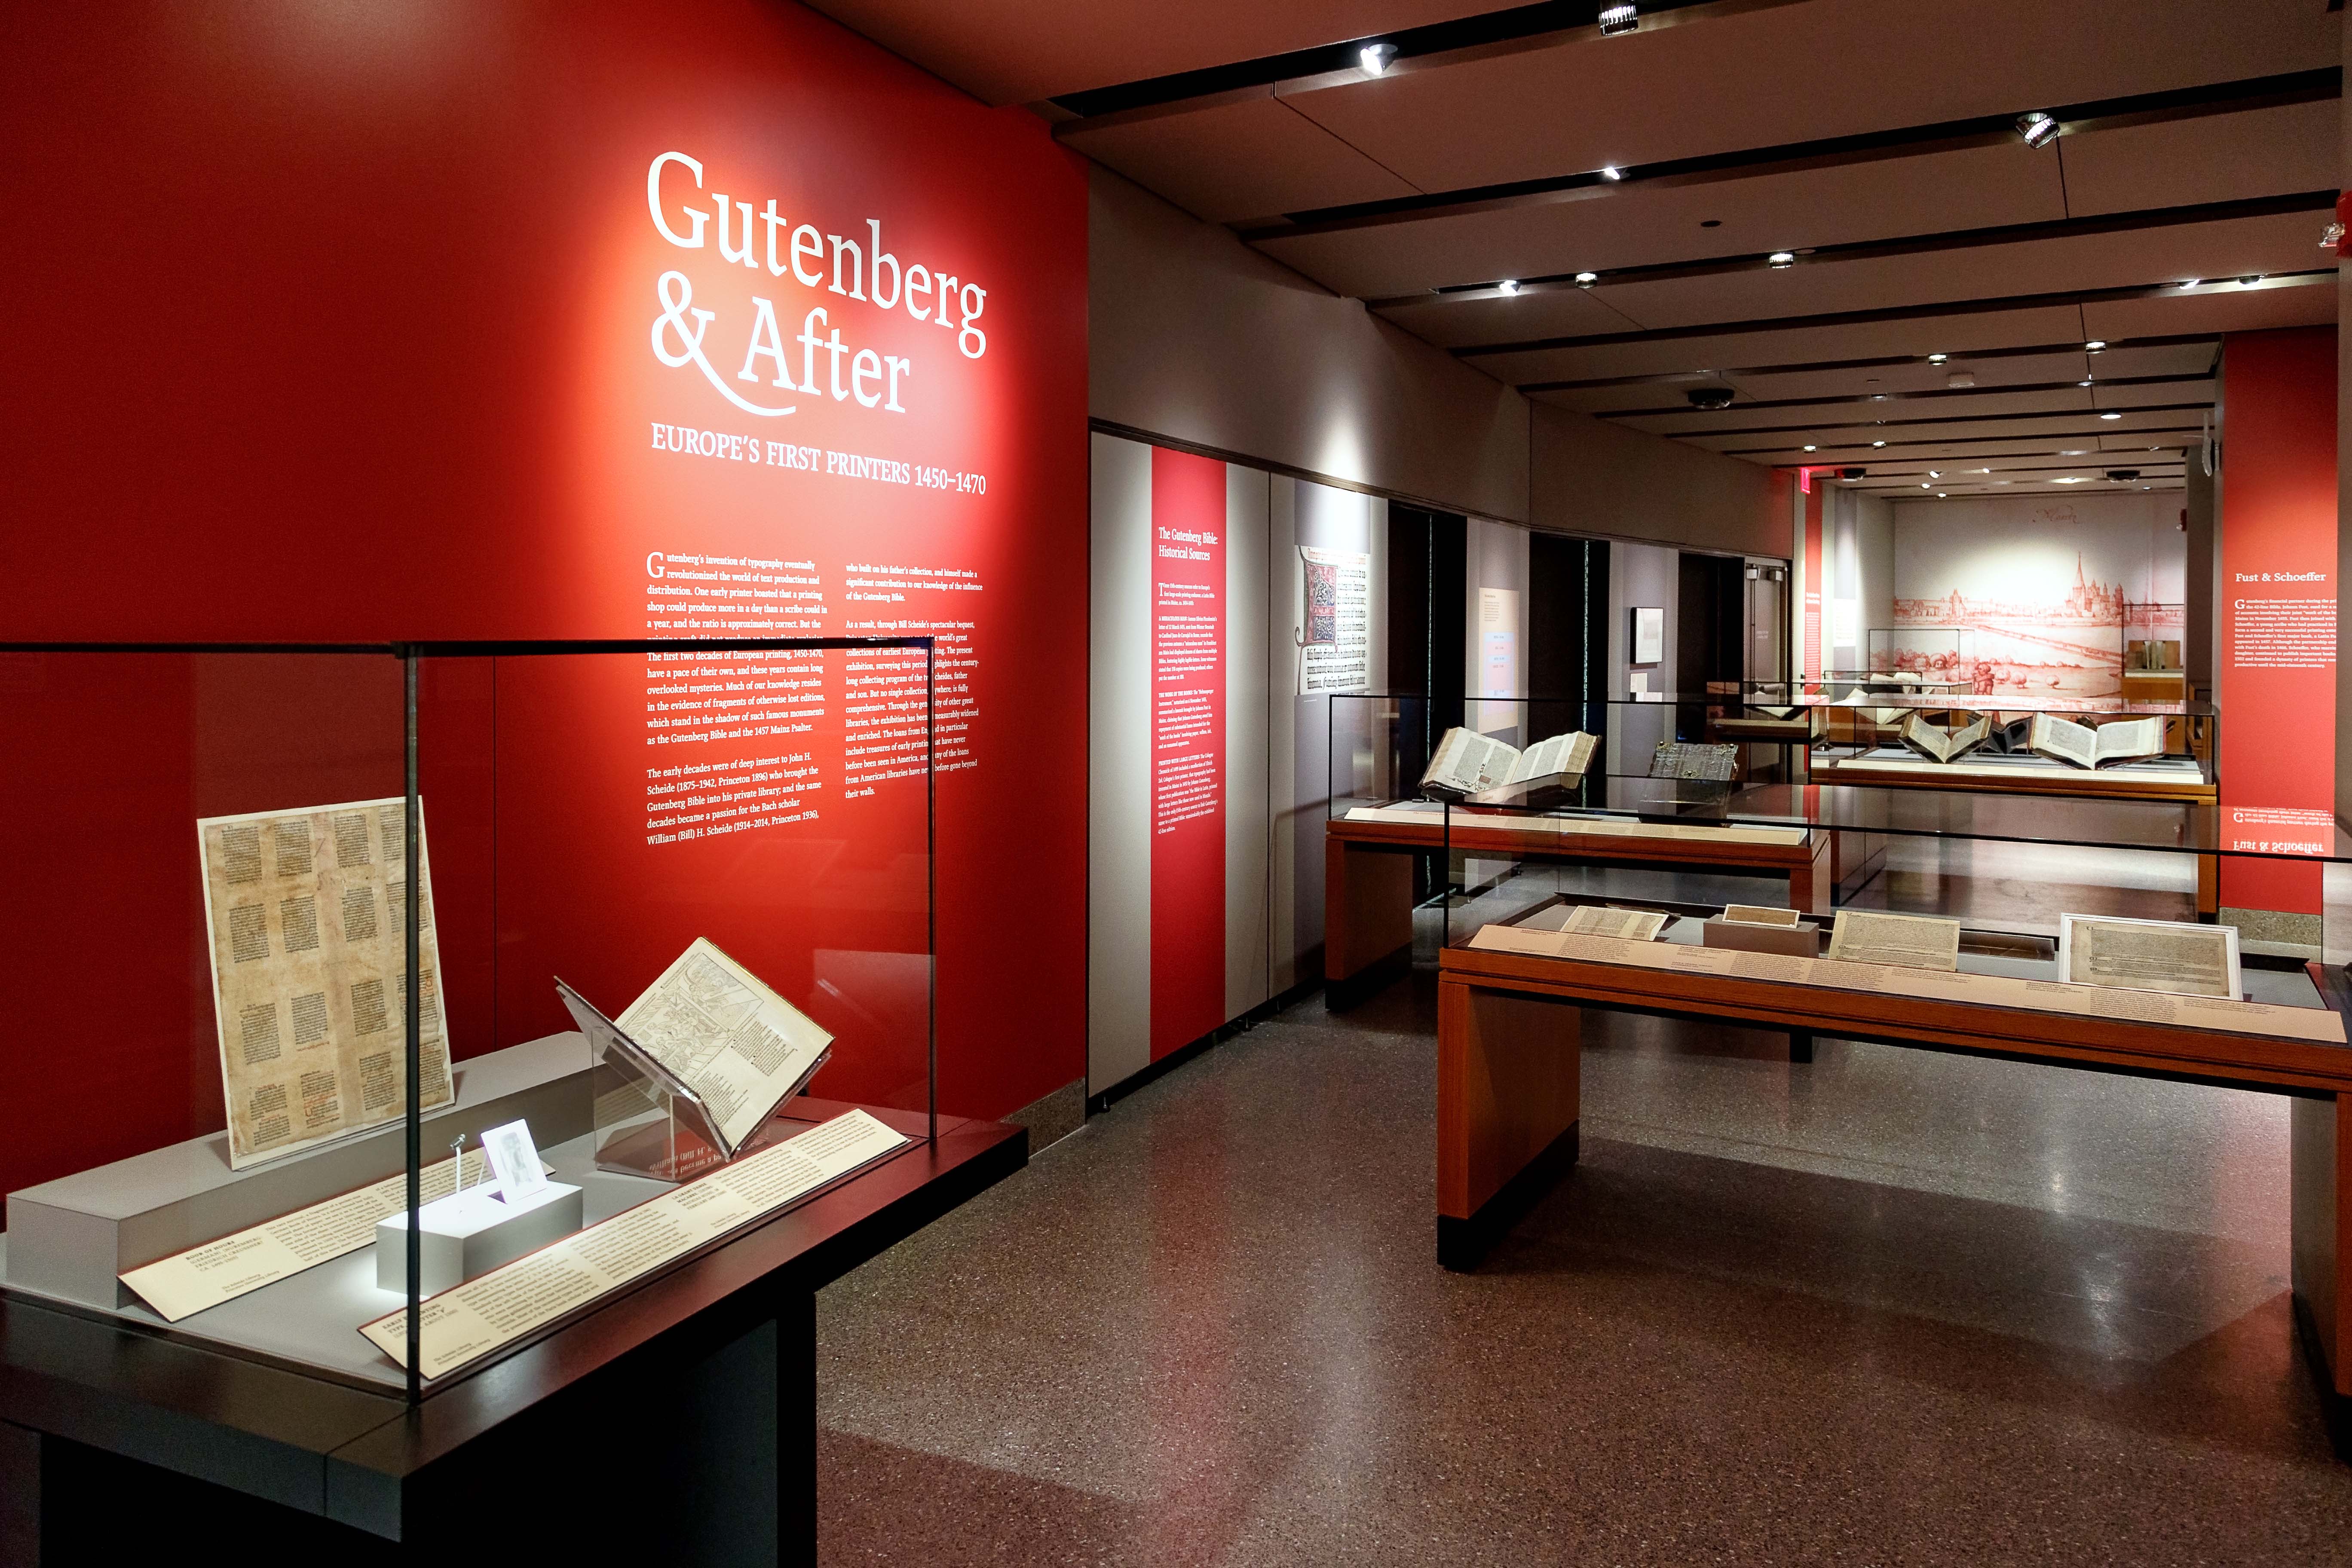 Gutenberg & After exhibition in the Milberg Gallery